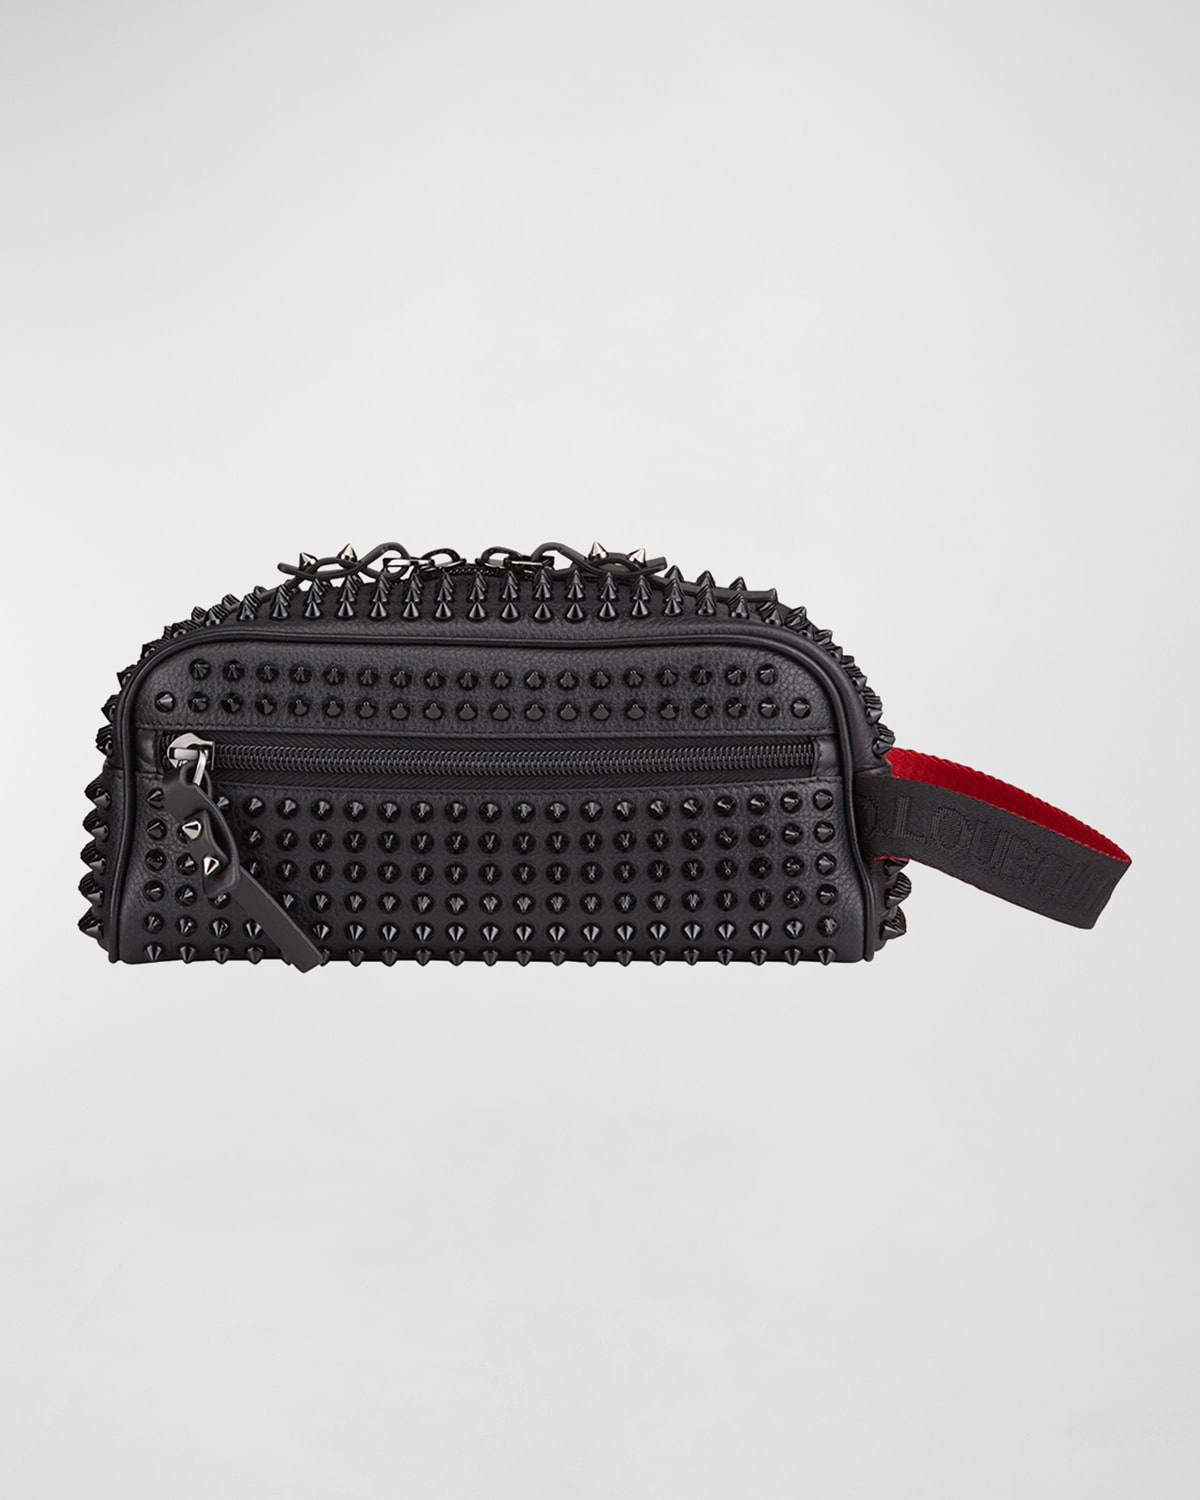 Men's Blaster Spiked Leather Travel Toiletry Bag